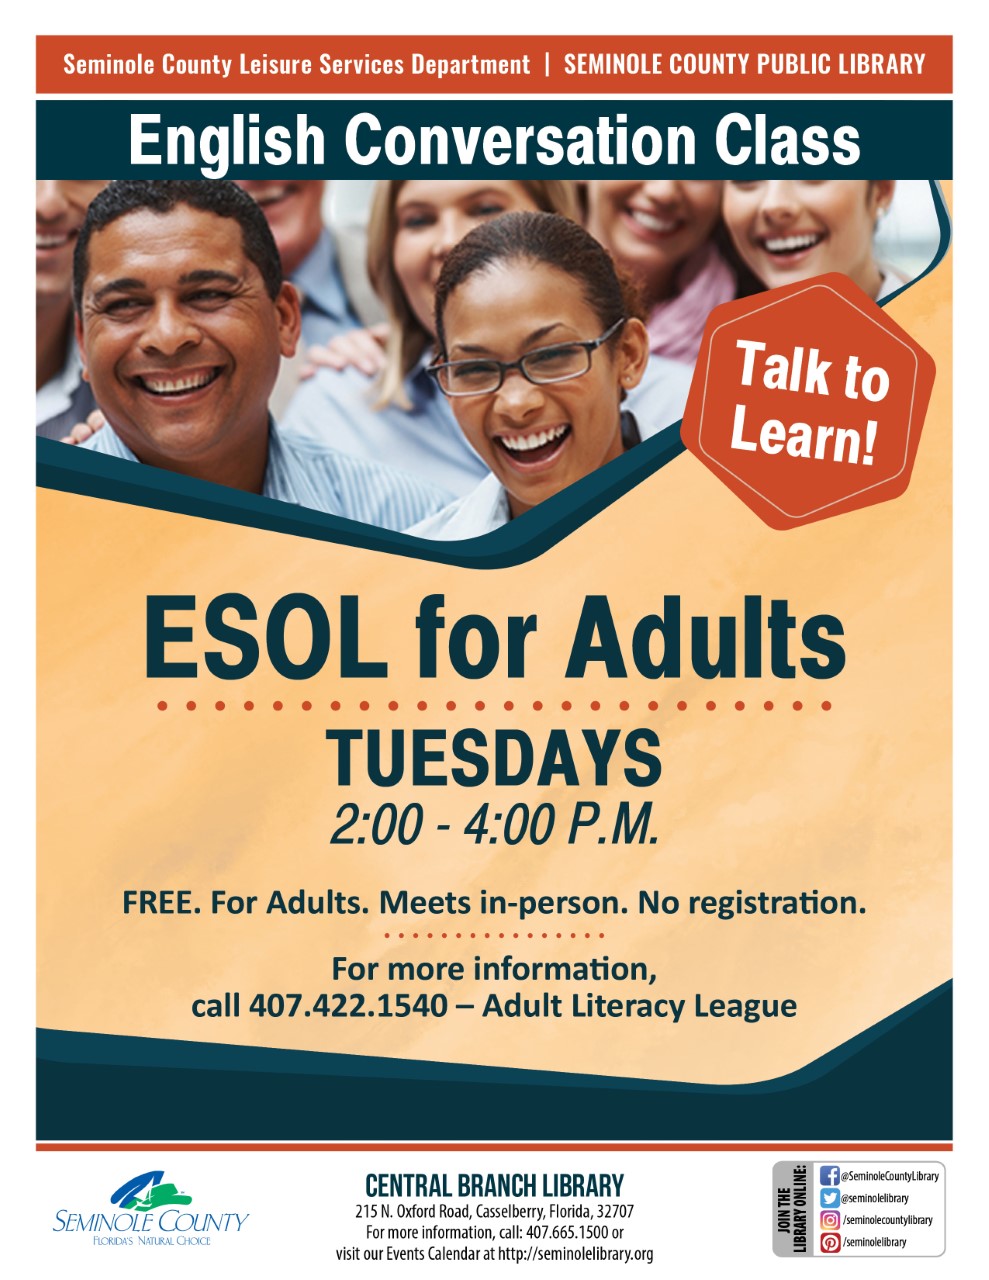 ESOL for Adults @ Central Branch Library